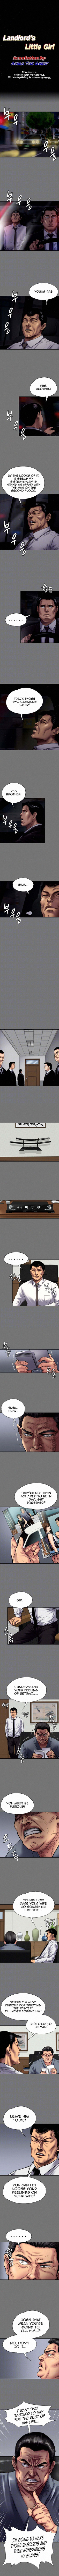 Panel Image 1 for chapter 80 of manhwa Queen Bee on read.oppai.stream